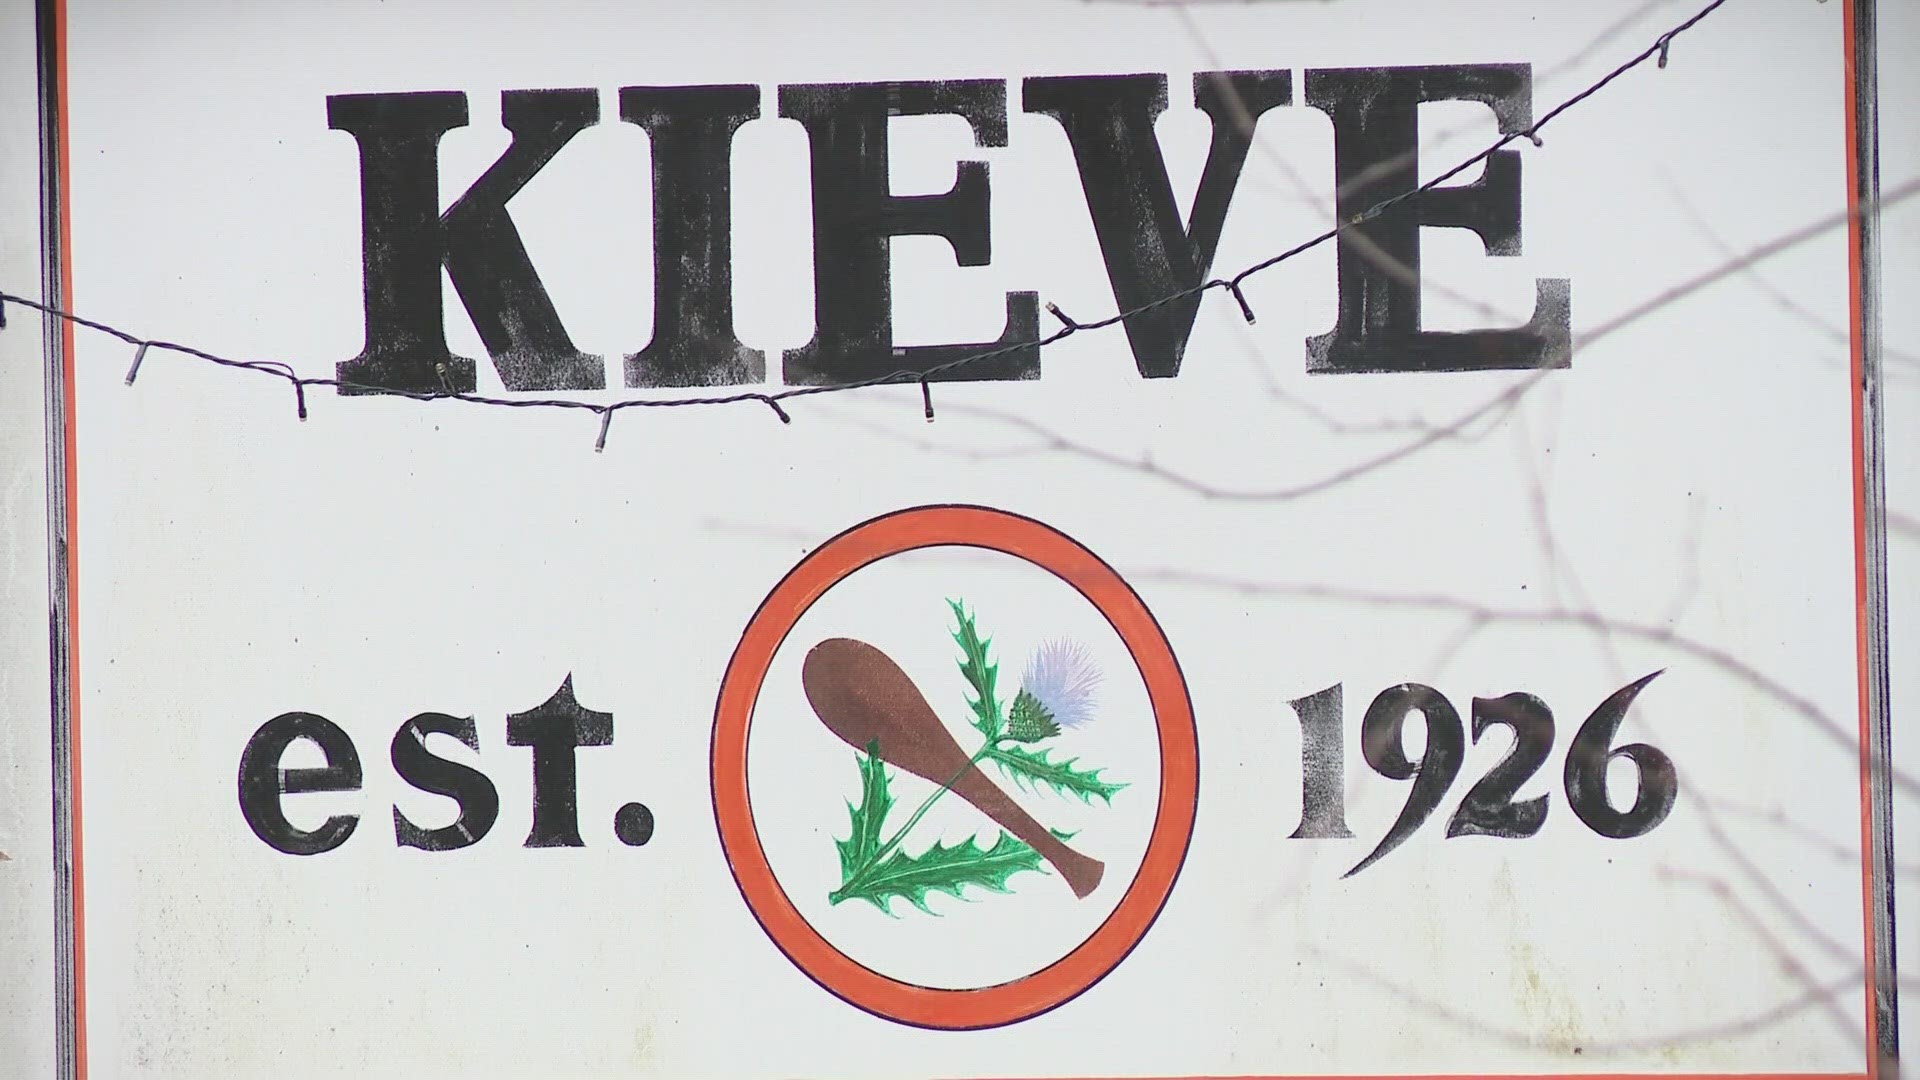 Former Camp Kieve counselor hit with more accusations of childhood sex abuse